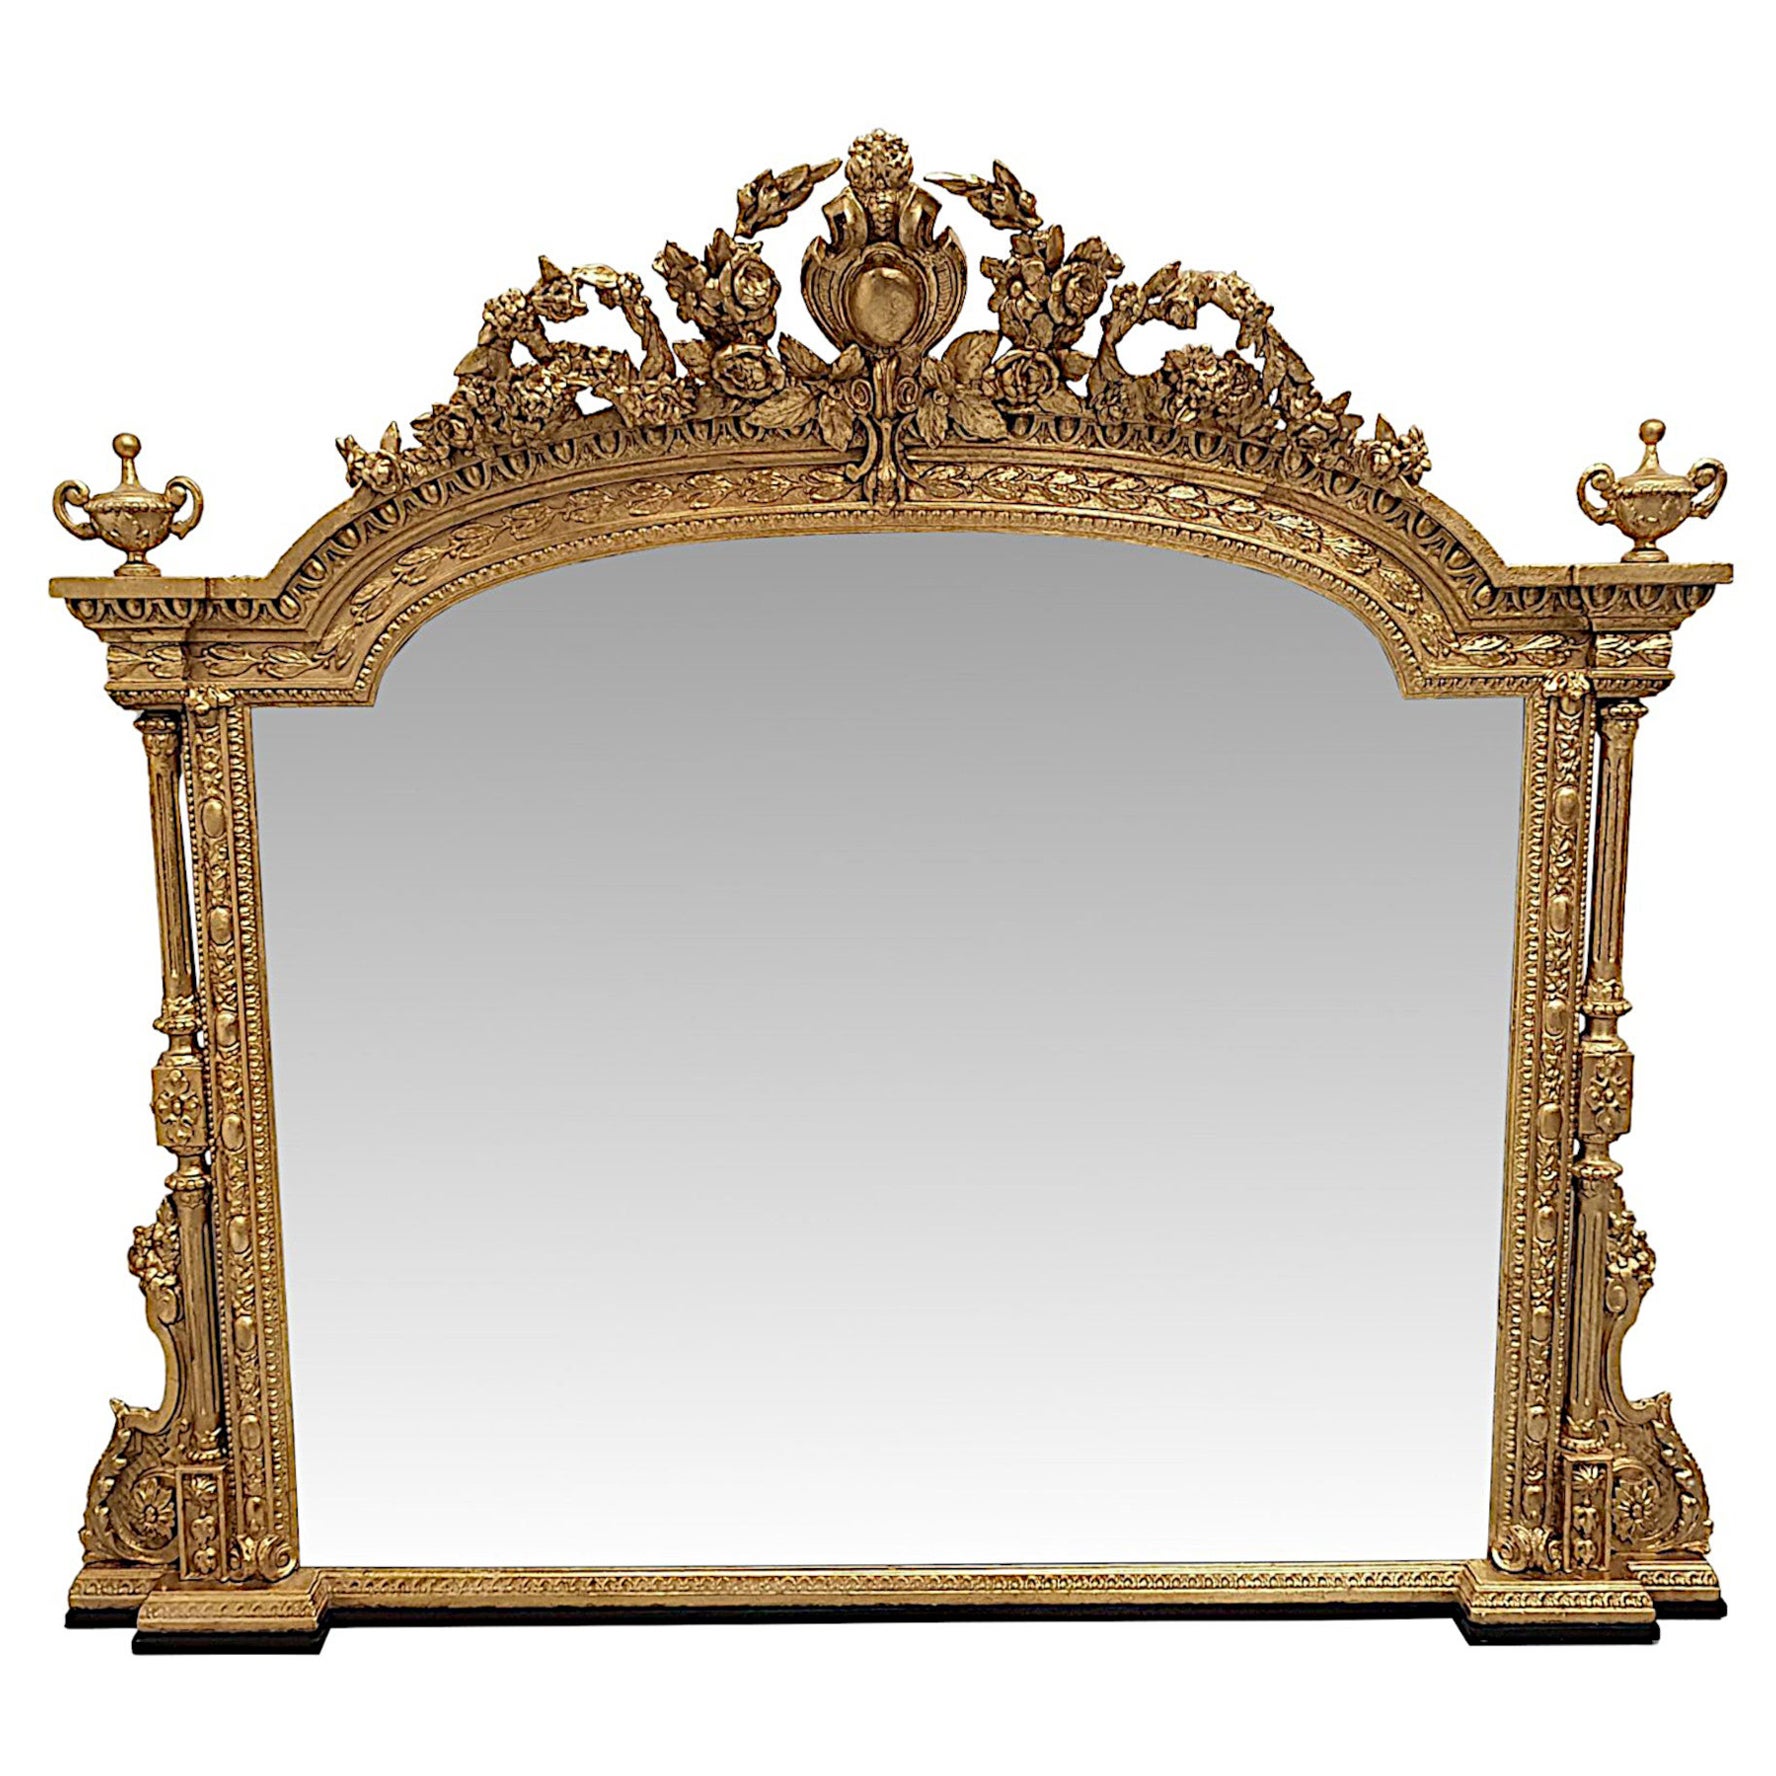  A Very Rare and Impressive 19th Century Giltwood Overmantle Mirror For Sale